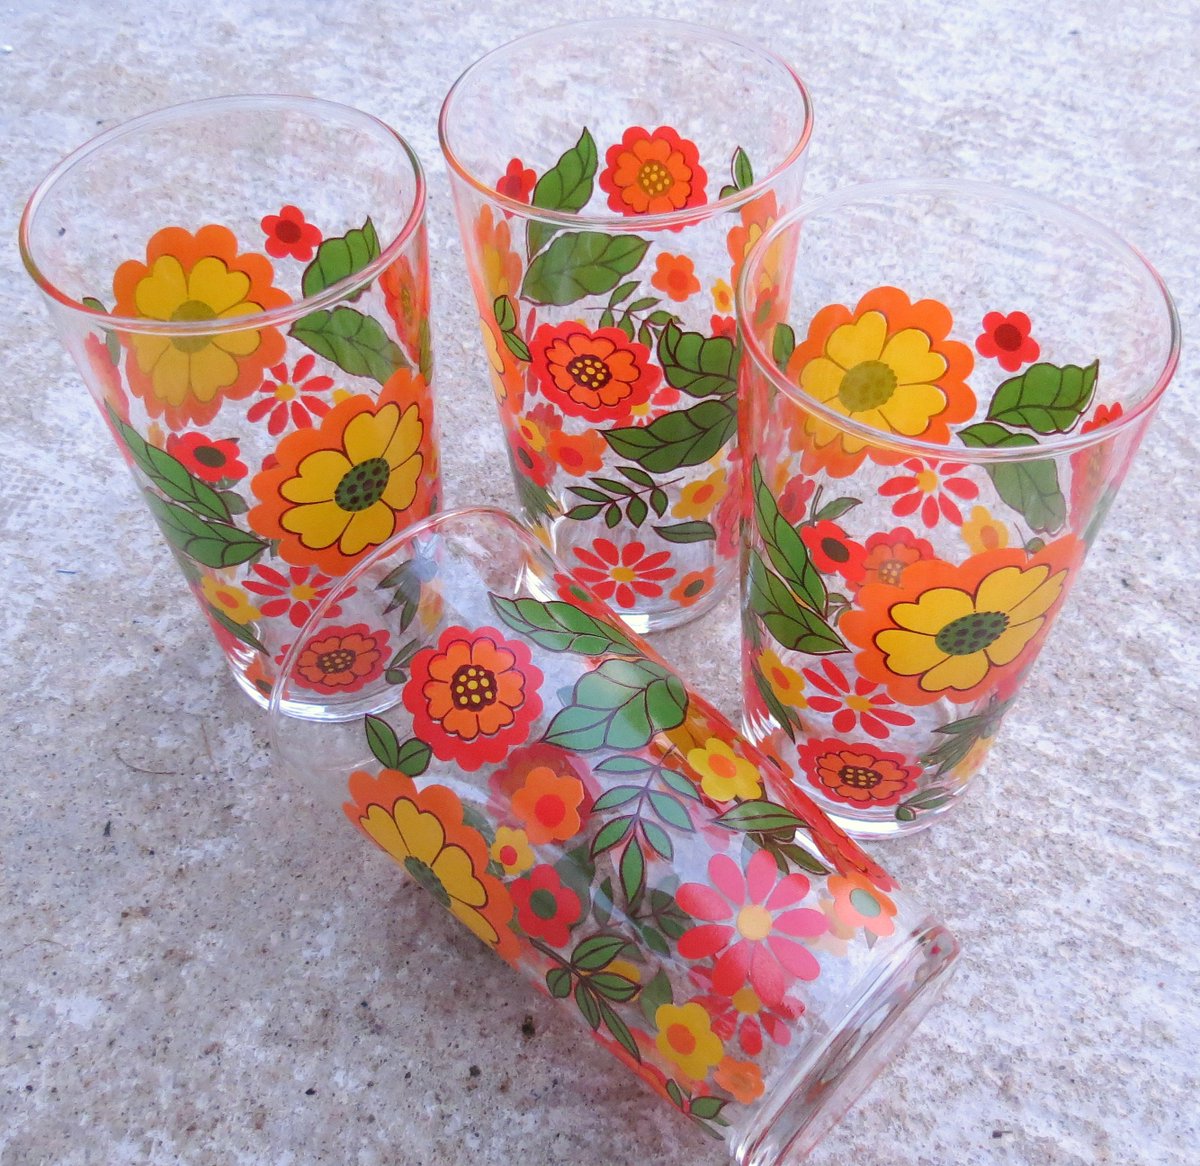 A splash of groovy vintage flower power on a grey winter's day!
etsy.com/uk/listing/594…
#sixties #groovy #vintagetumblers #reloved #flowerpower #EtsySeller